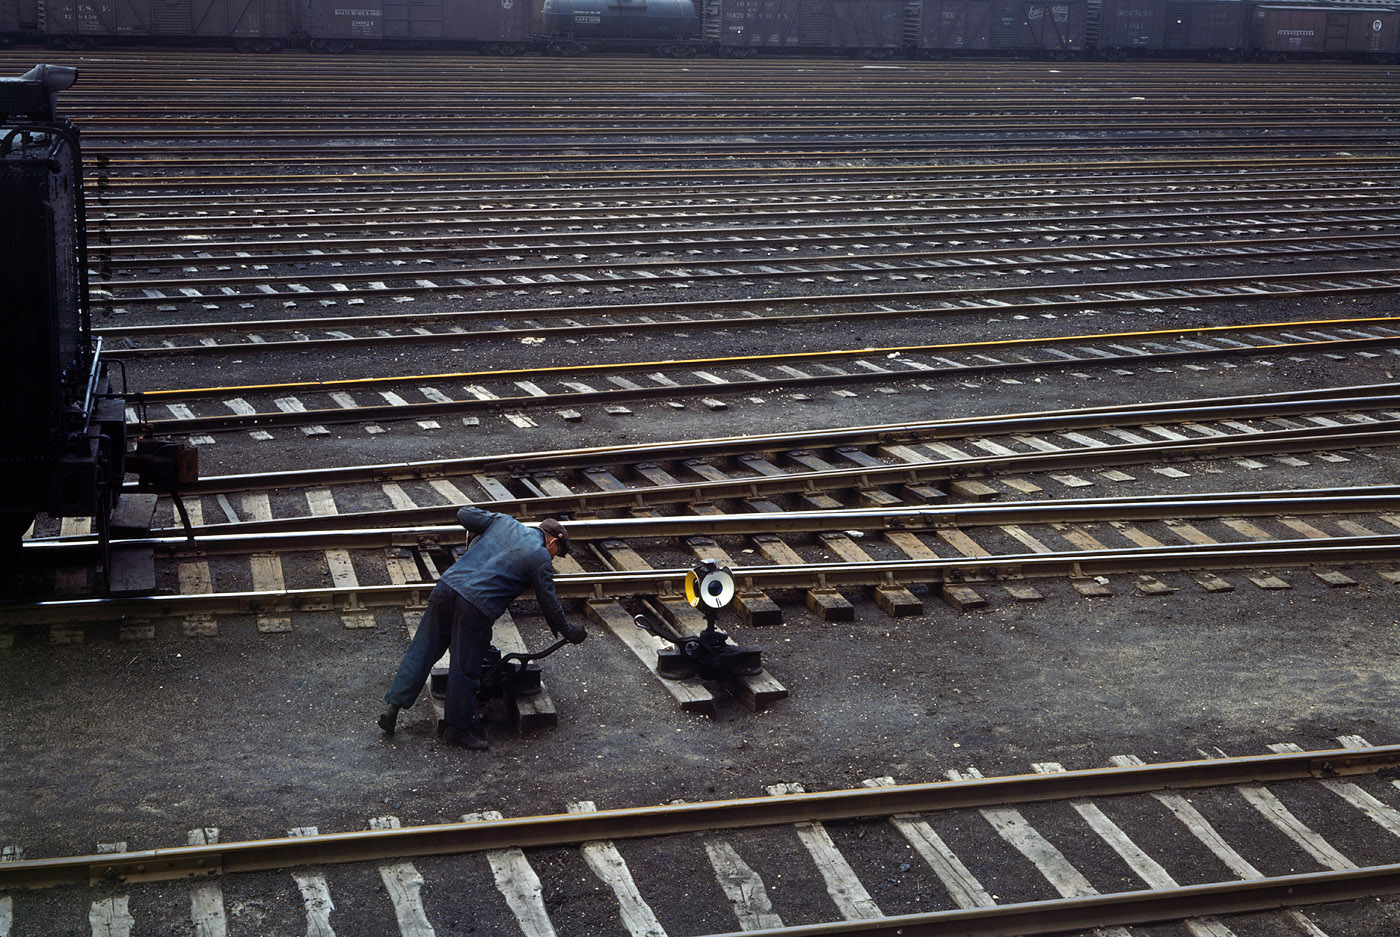 Switchman at the Chicago & Northwestern R.R. Proviso Yard, Chicago. April 1943. View full size. 4x5 Kodachrome transparency by Jack Delano.